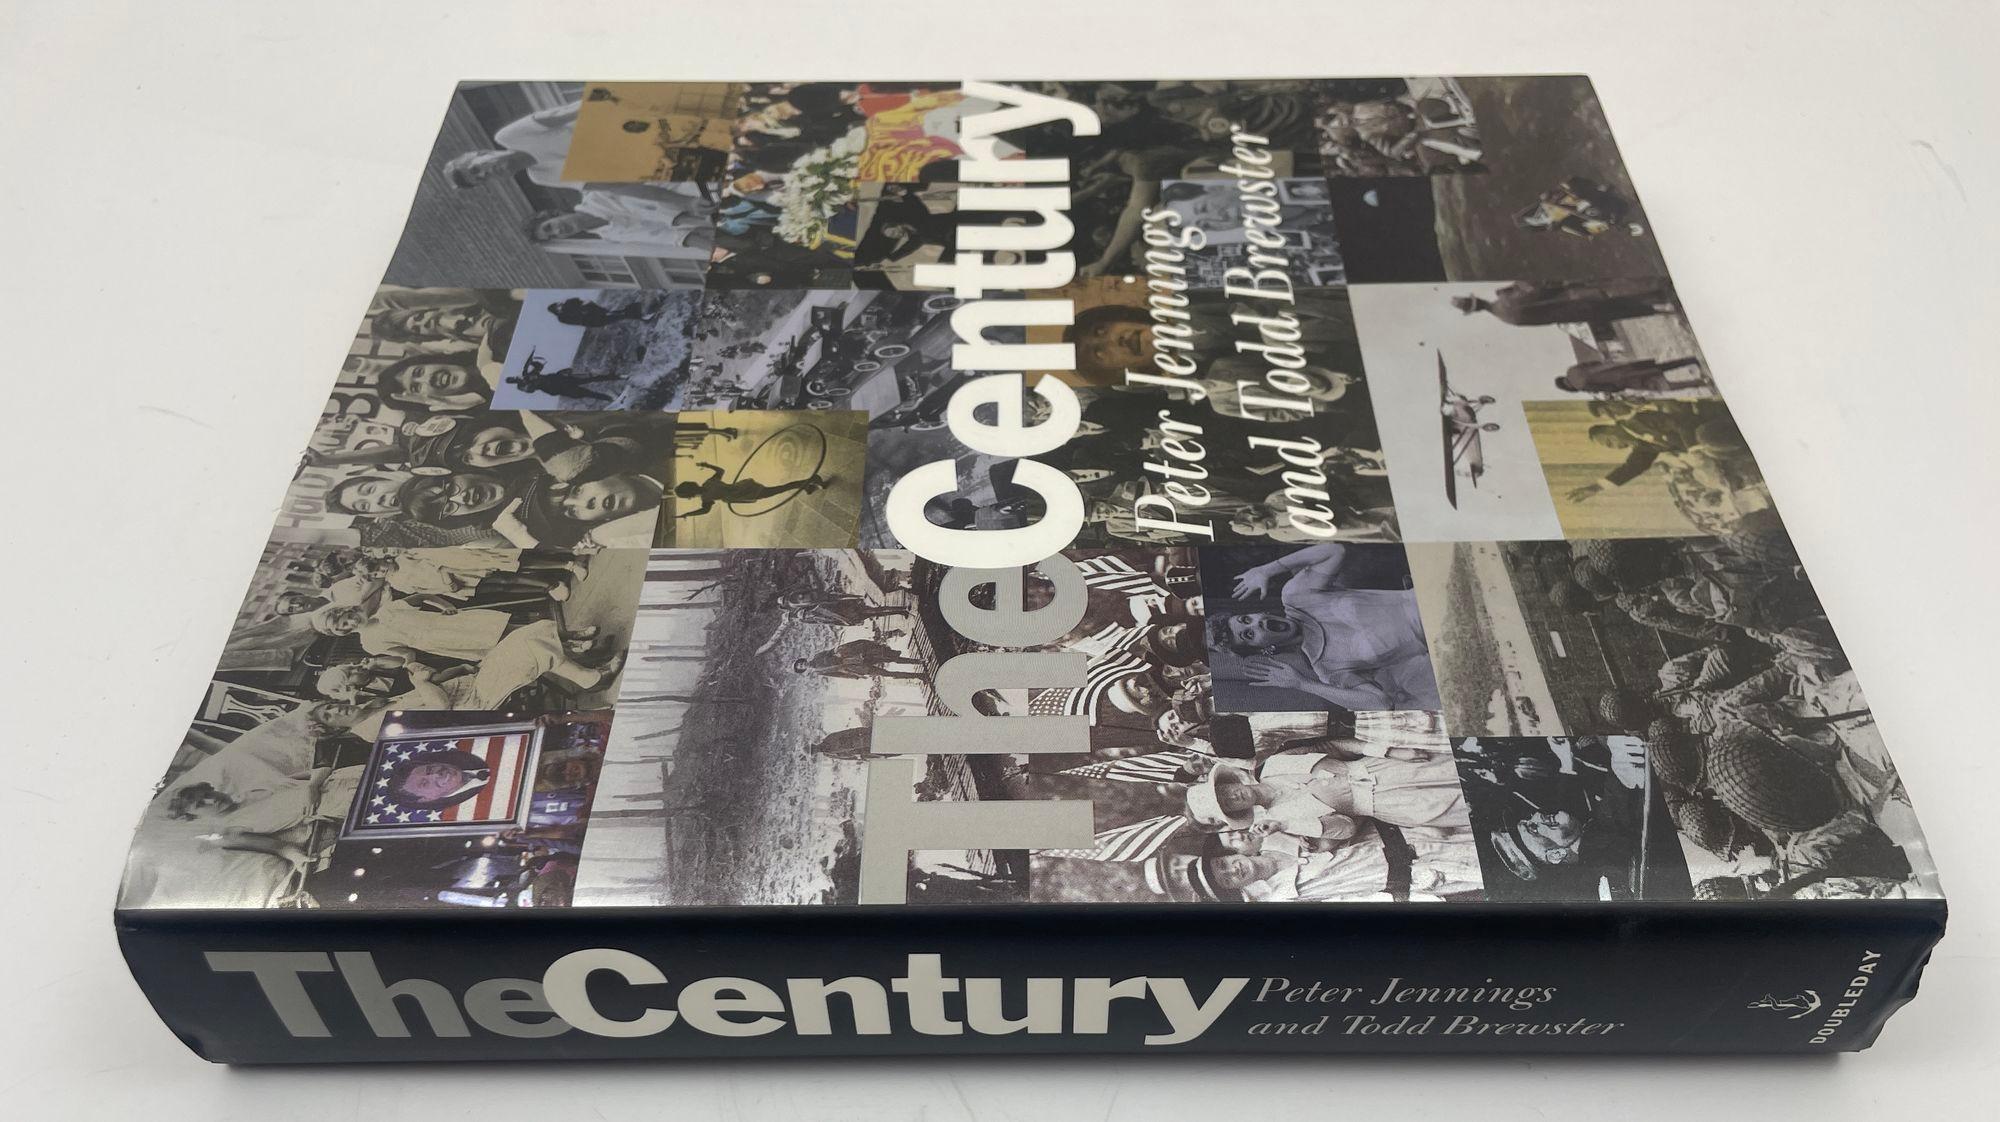 American The Century by Peter Jennings and Todd Brewster Published by Doubleday 1998 For Sale